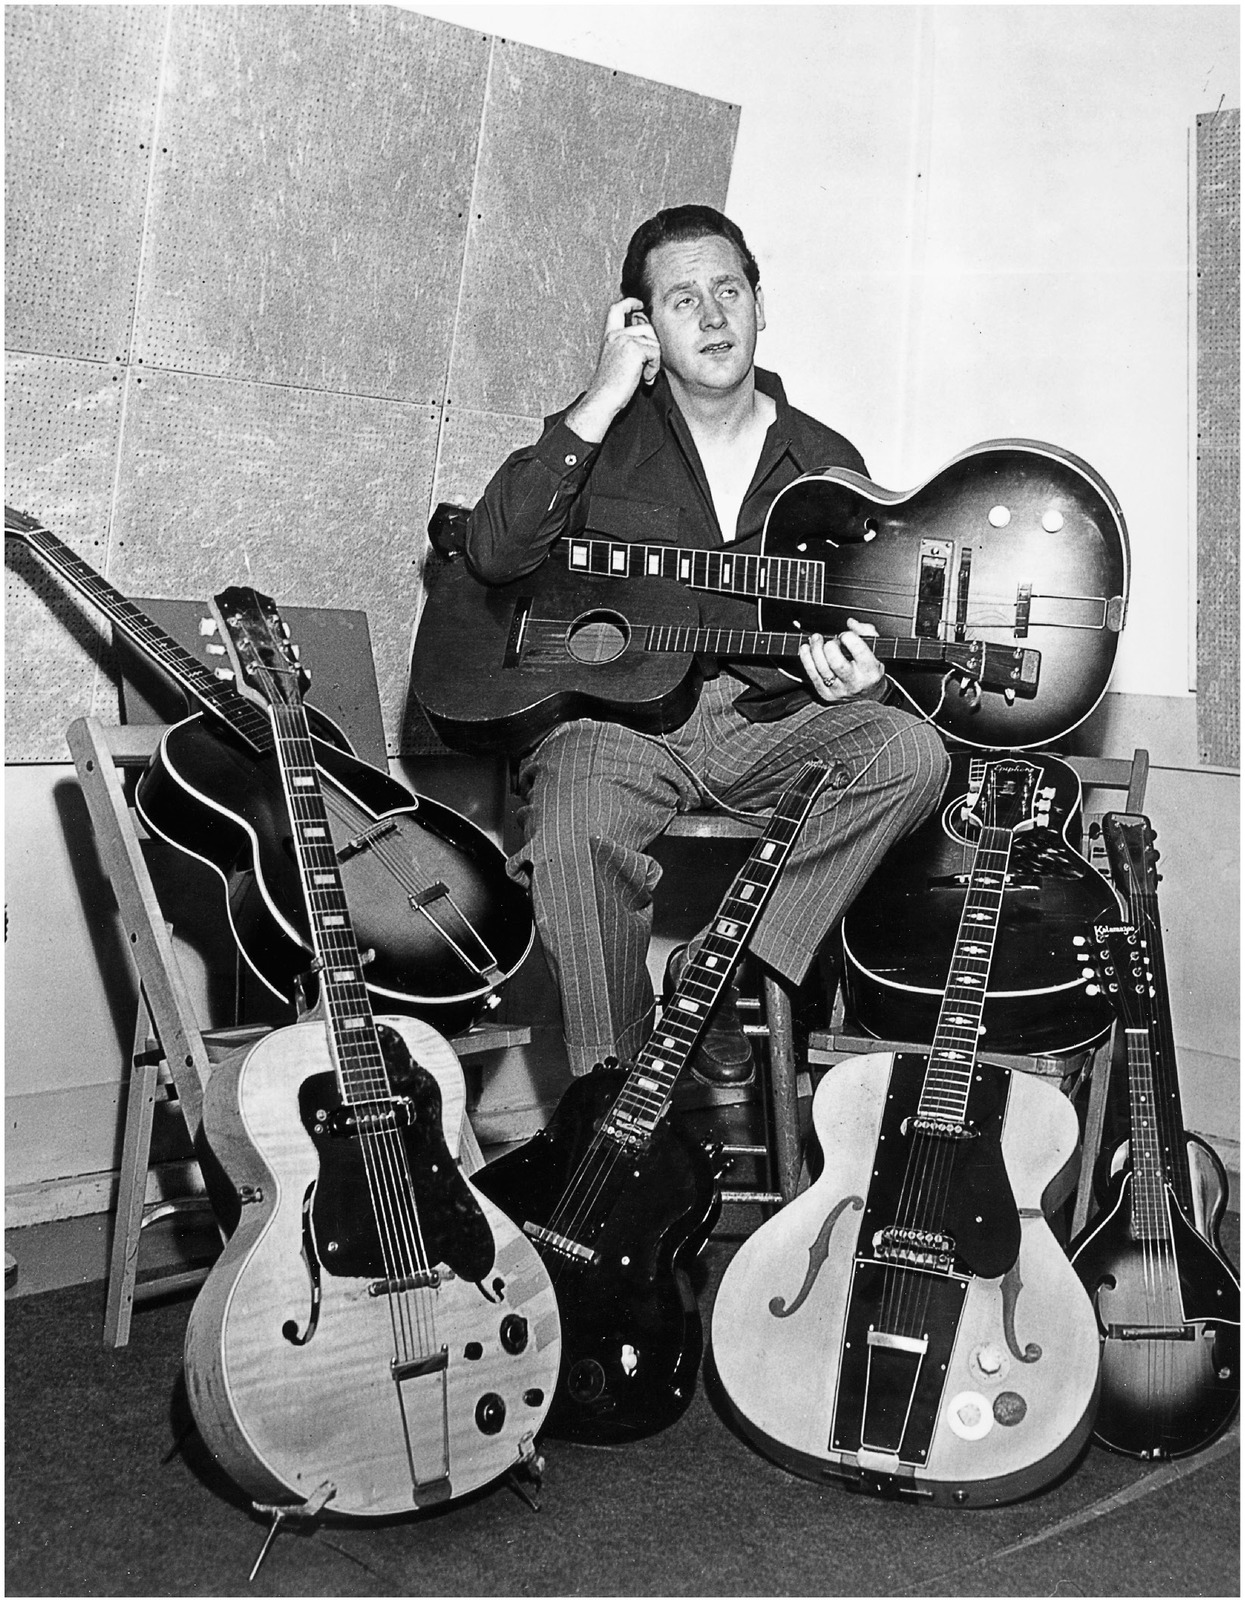 LOS ANGELES - 1946: Guitarist and inventor Les Paul poses with his inventions for a portrait in his garage studio on in 1946. (Photo by Michael Ochs Archives/Getty Images) 